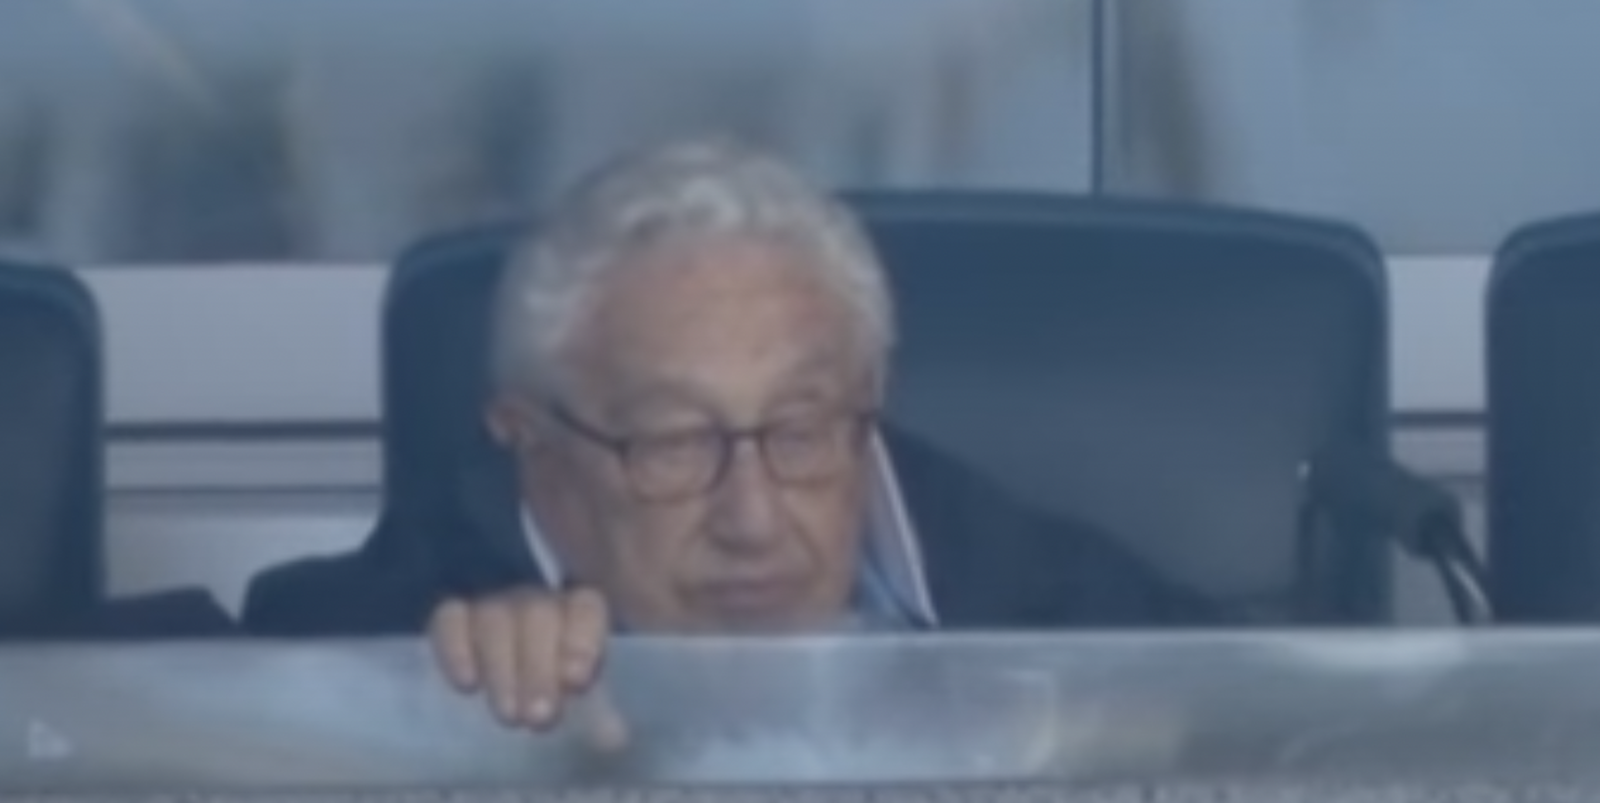 Henry Kissinger looking like a little goblin while watching a Yankees fan